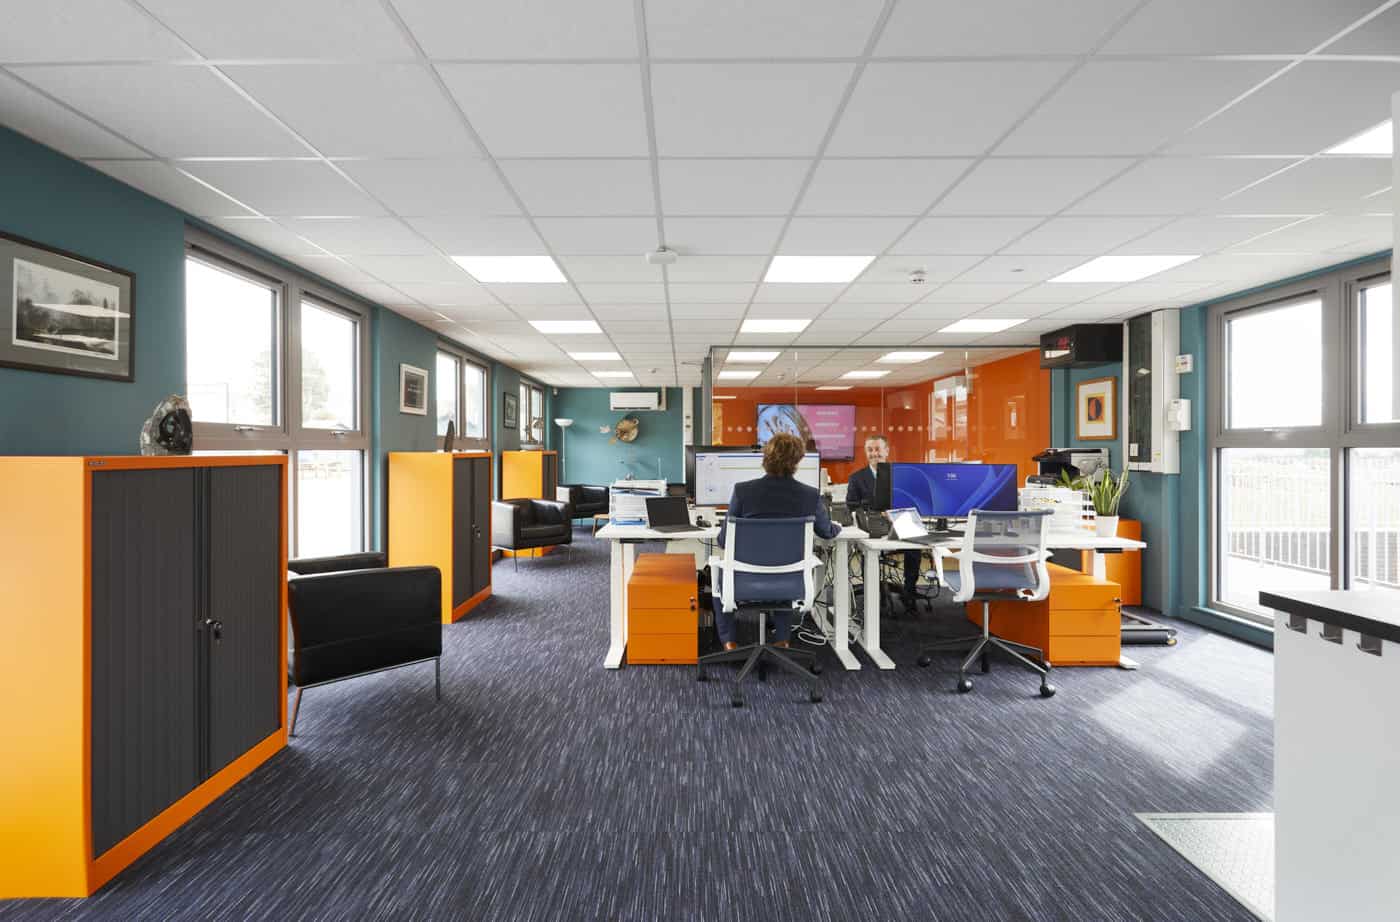 Inside a modular office facility. 2 people sat at computers on their desks in the centre of the room. colour fun blue and orange walls. Orange cabinets. Black arm chairs near the windows.